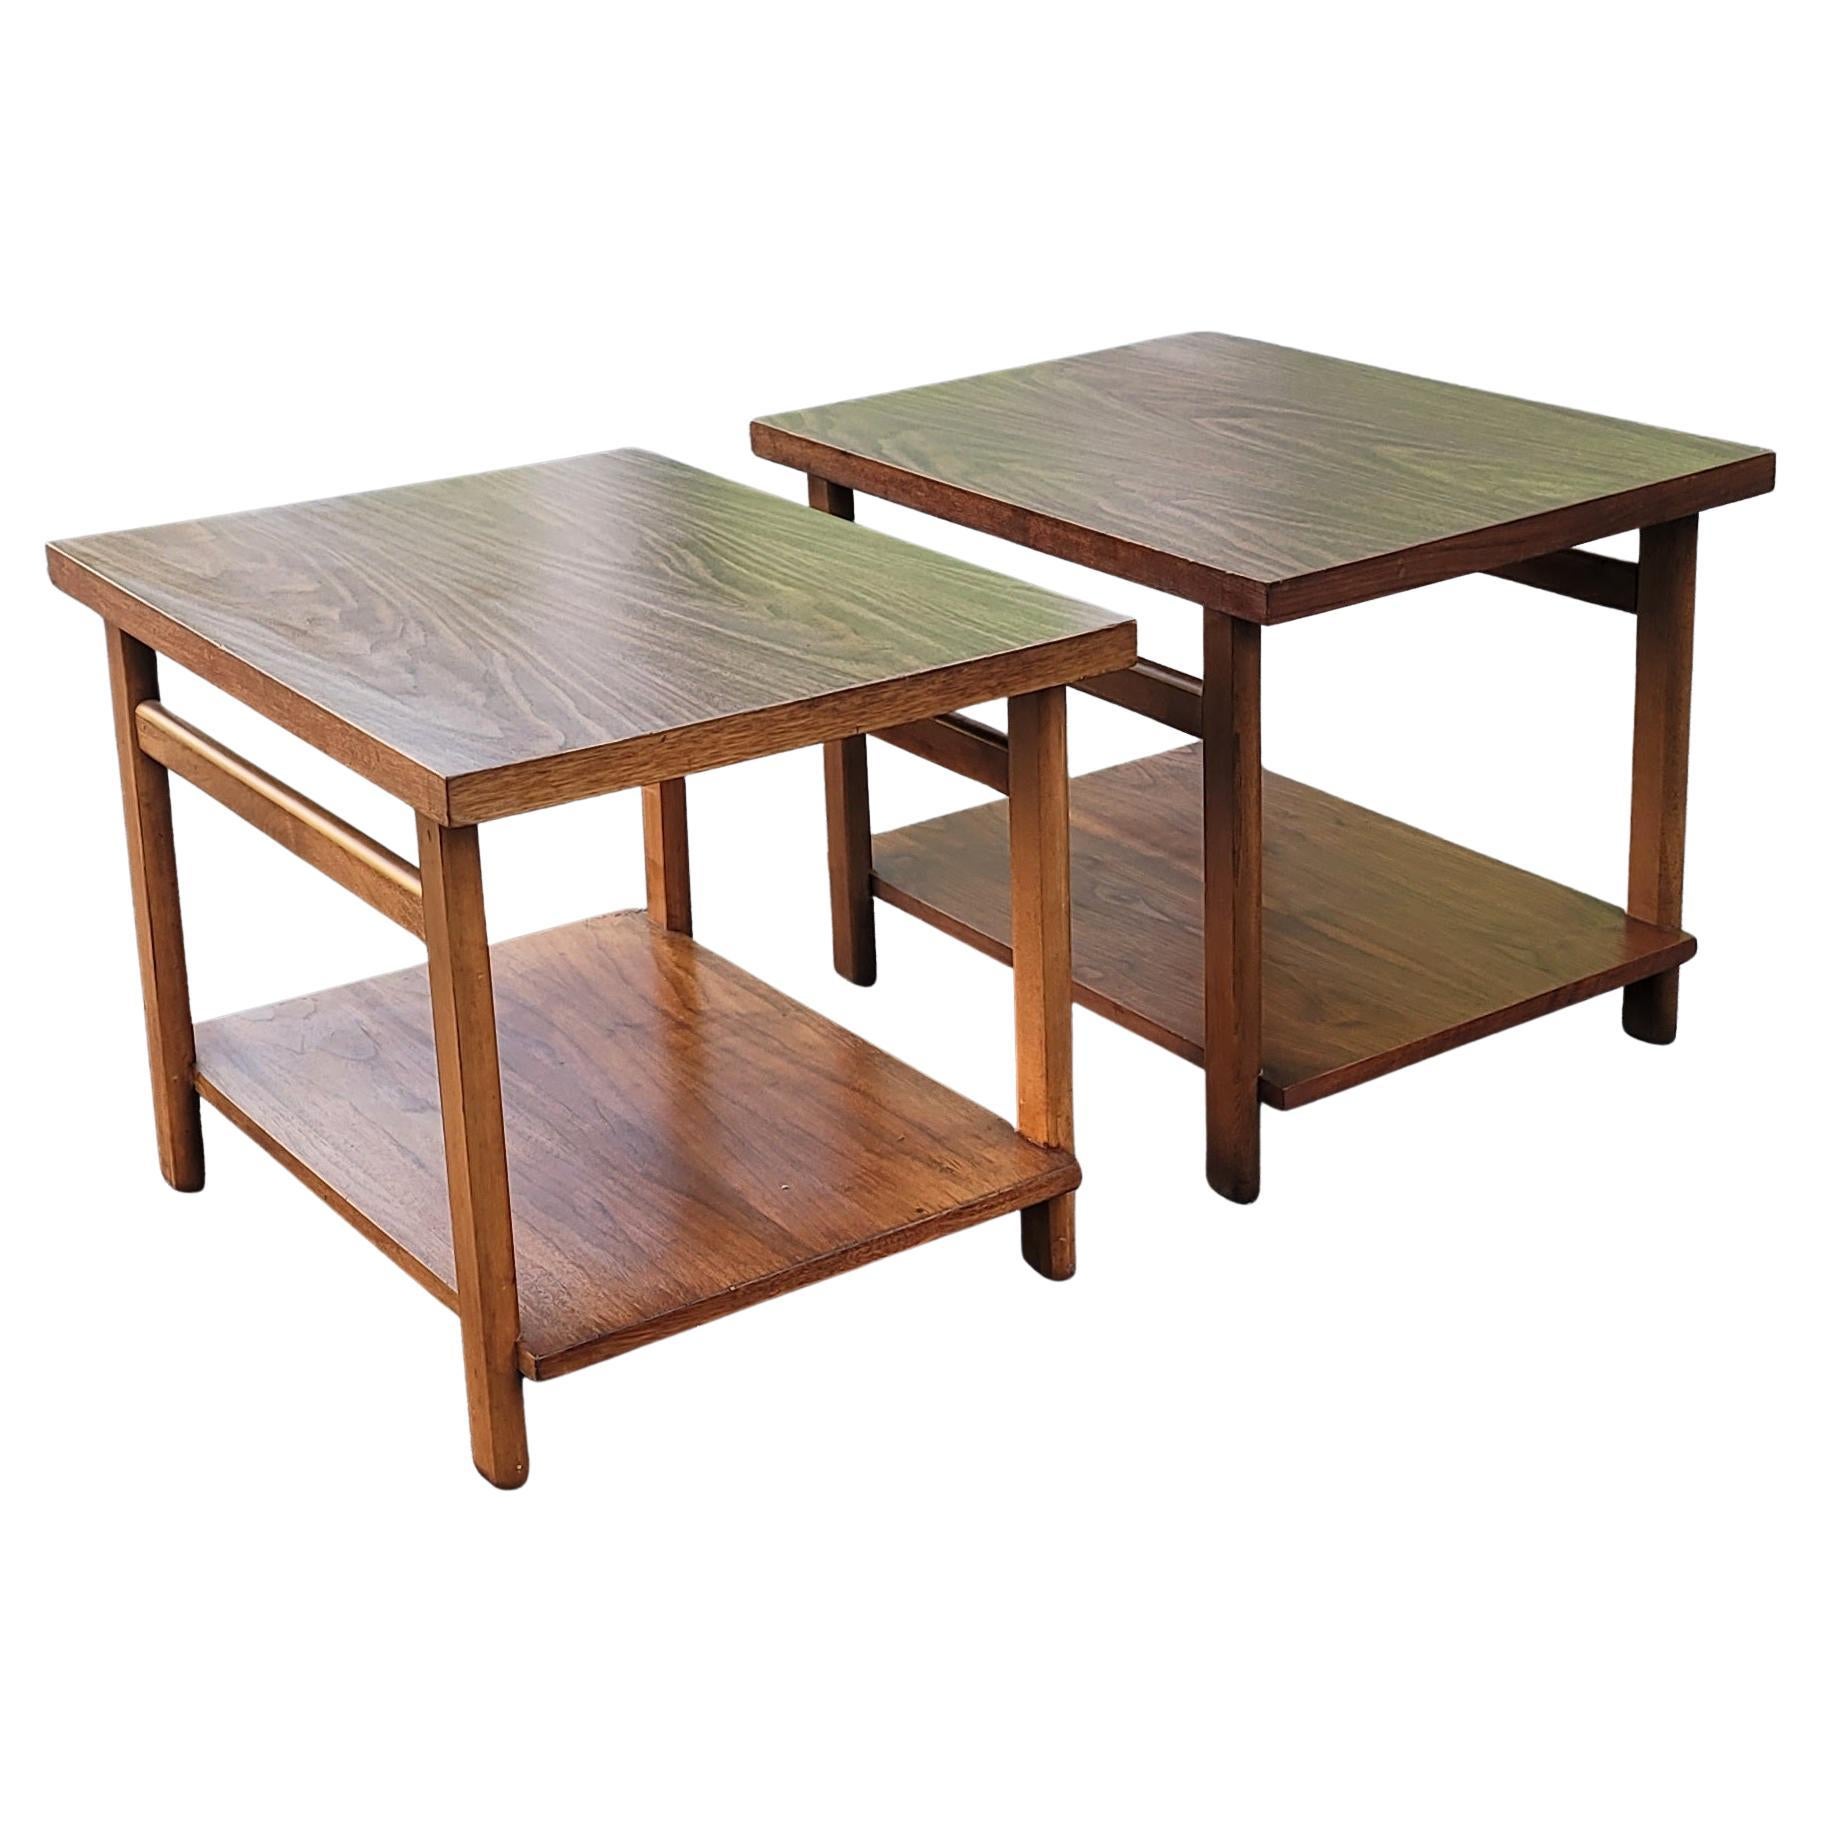 A pair of rectangular 1960s Lane Altavista Two Tier Side Tables with Formica Top in very good vintage condition. Tables measures 20